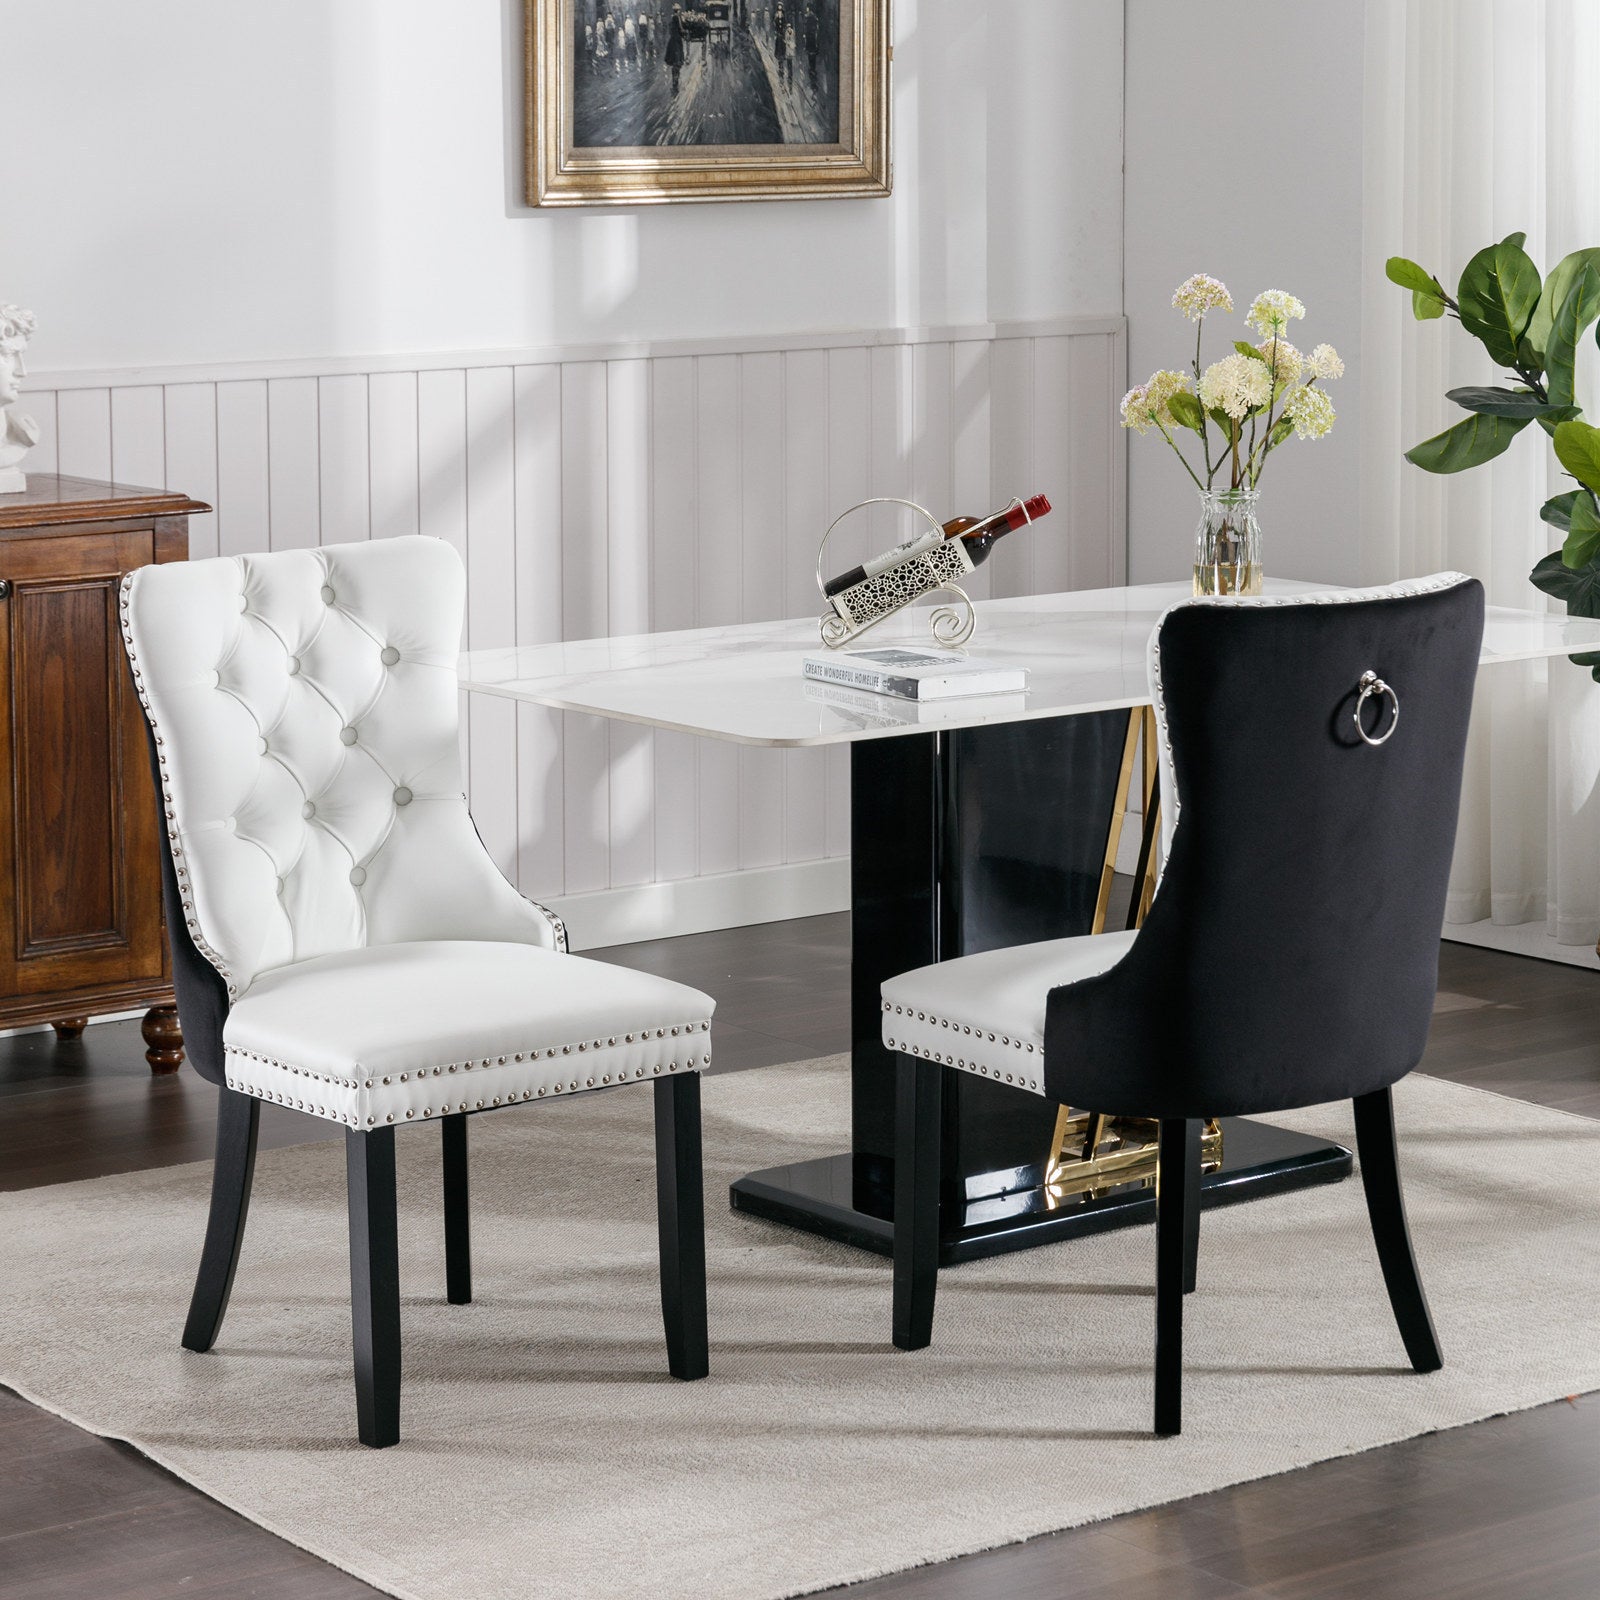 🆓🚛 High-End Tufted Solid Wood Contemporary Pu and Velvet Upholstered Dining Chair With Wood Legs Nailhead Trim 2-Pcs Set, White & Black